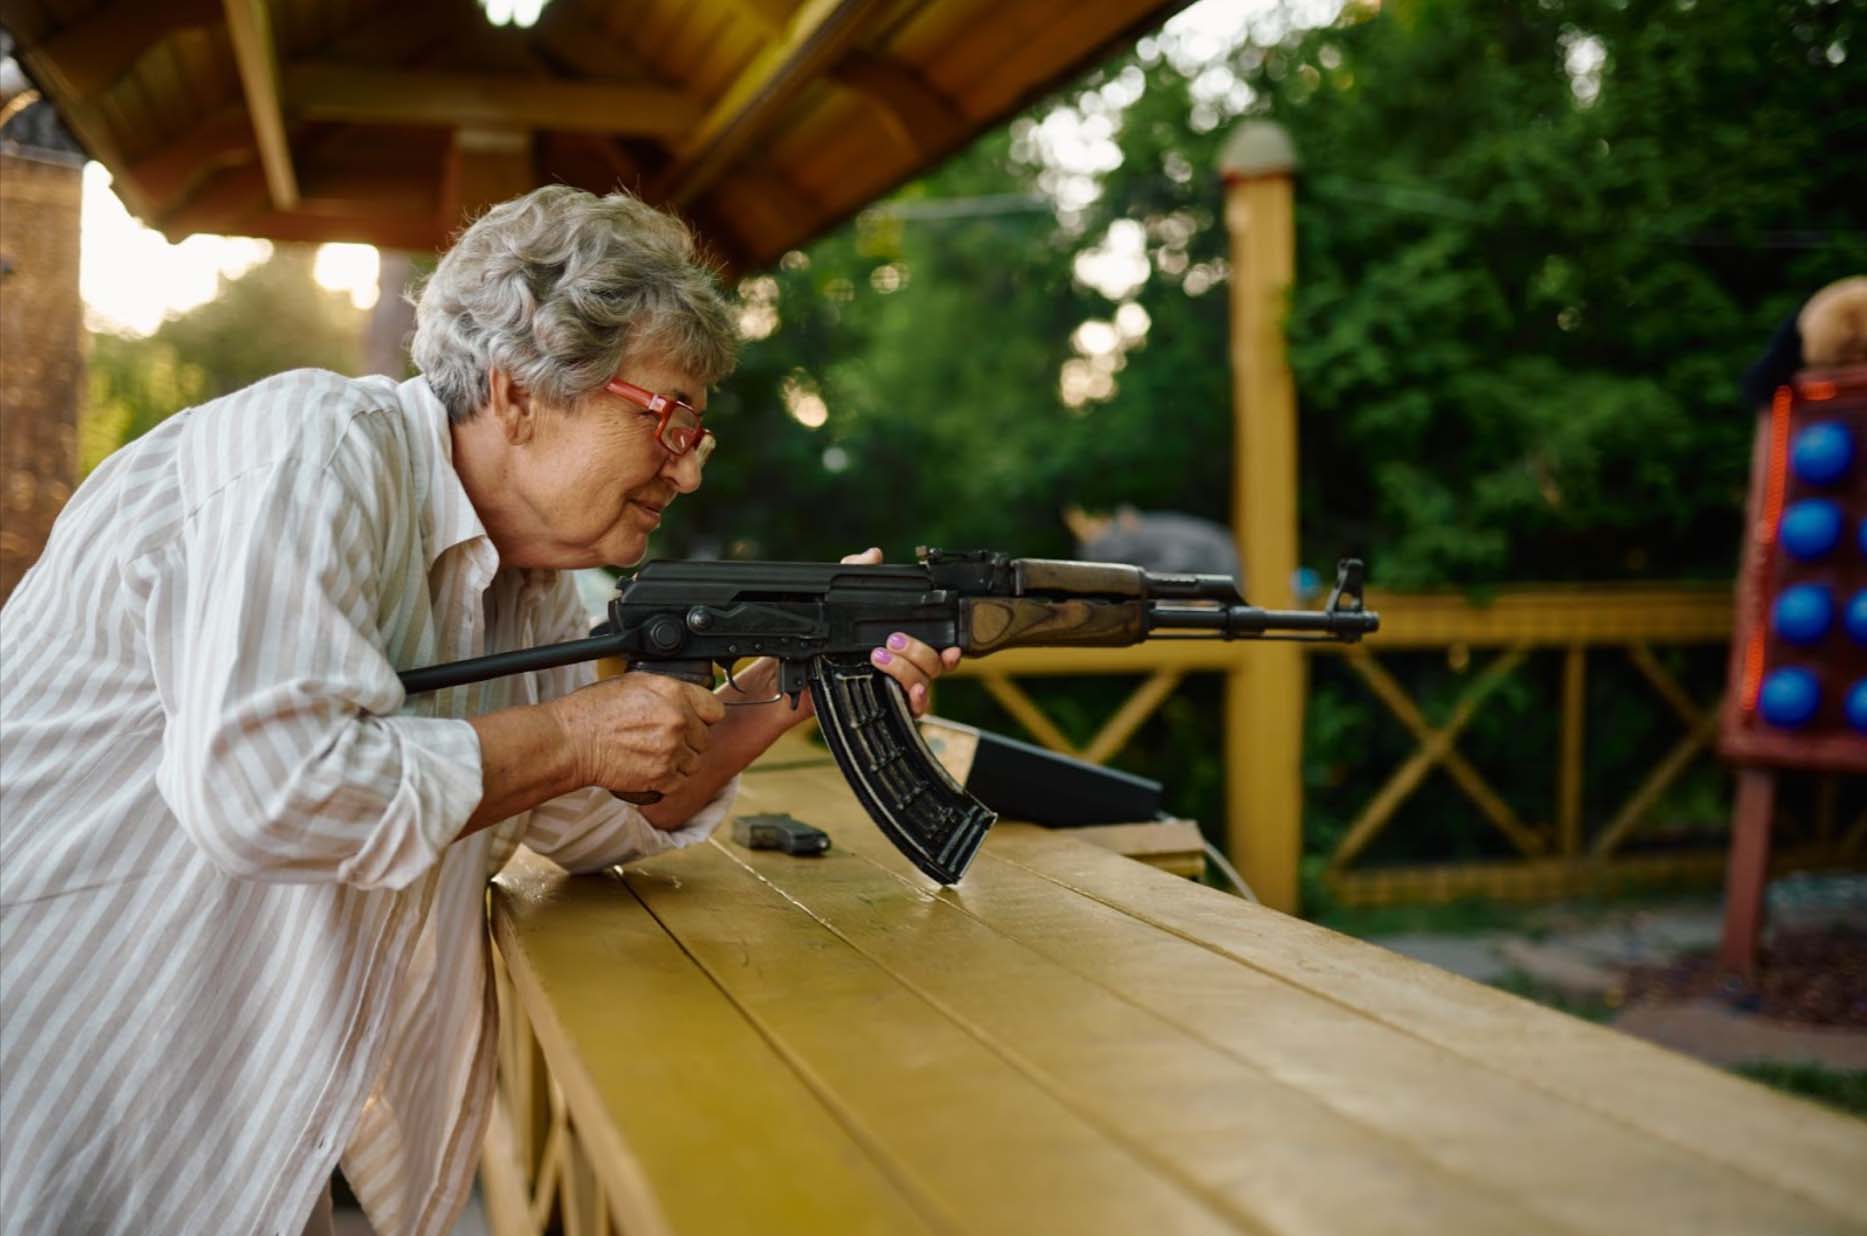 A grandmother participates in a home defense training session at a shooting range, practicing with precision and focus.